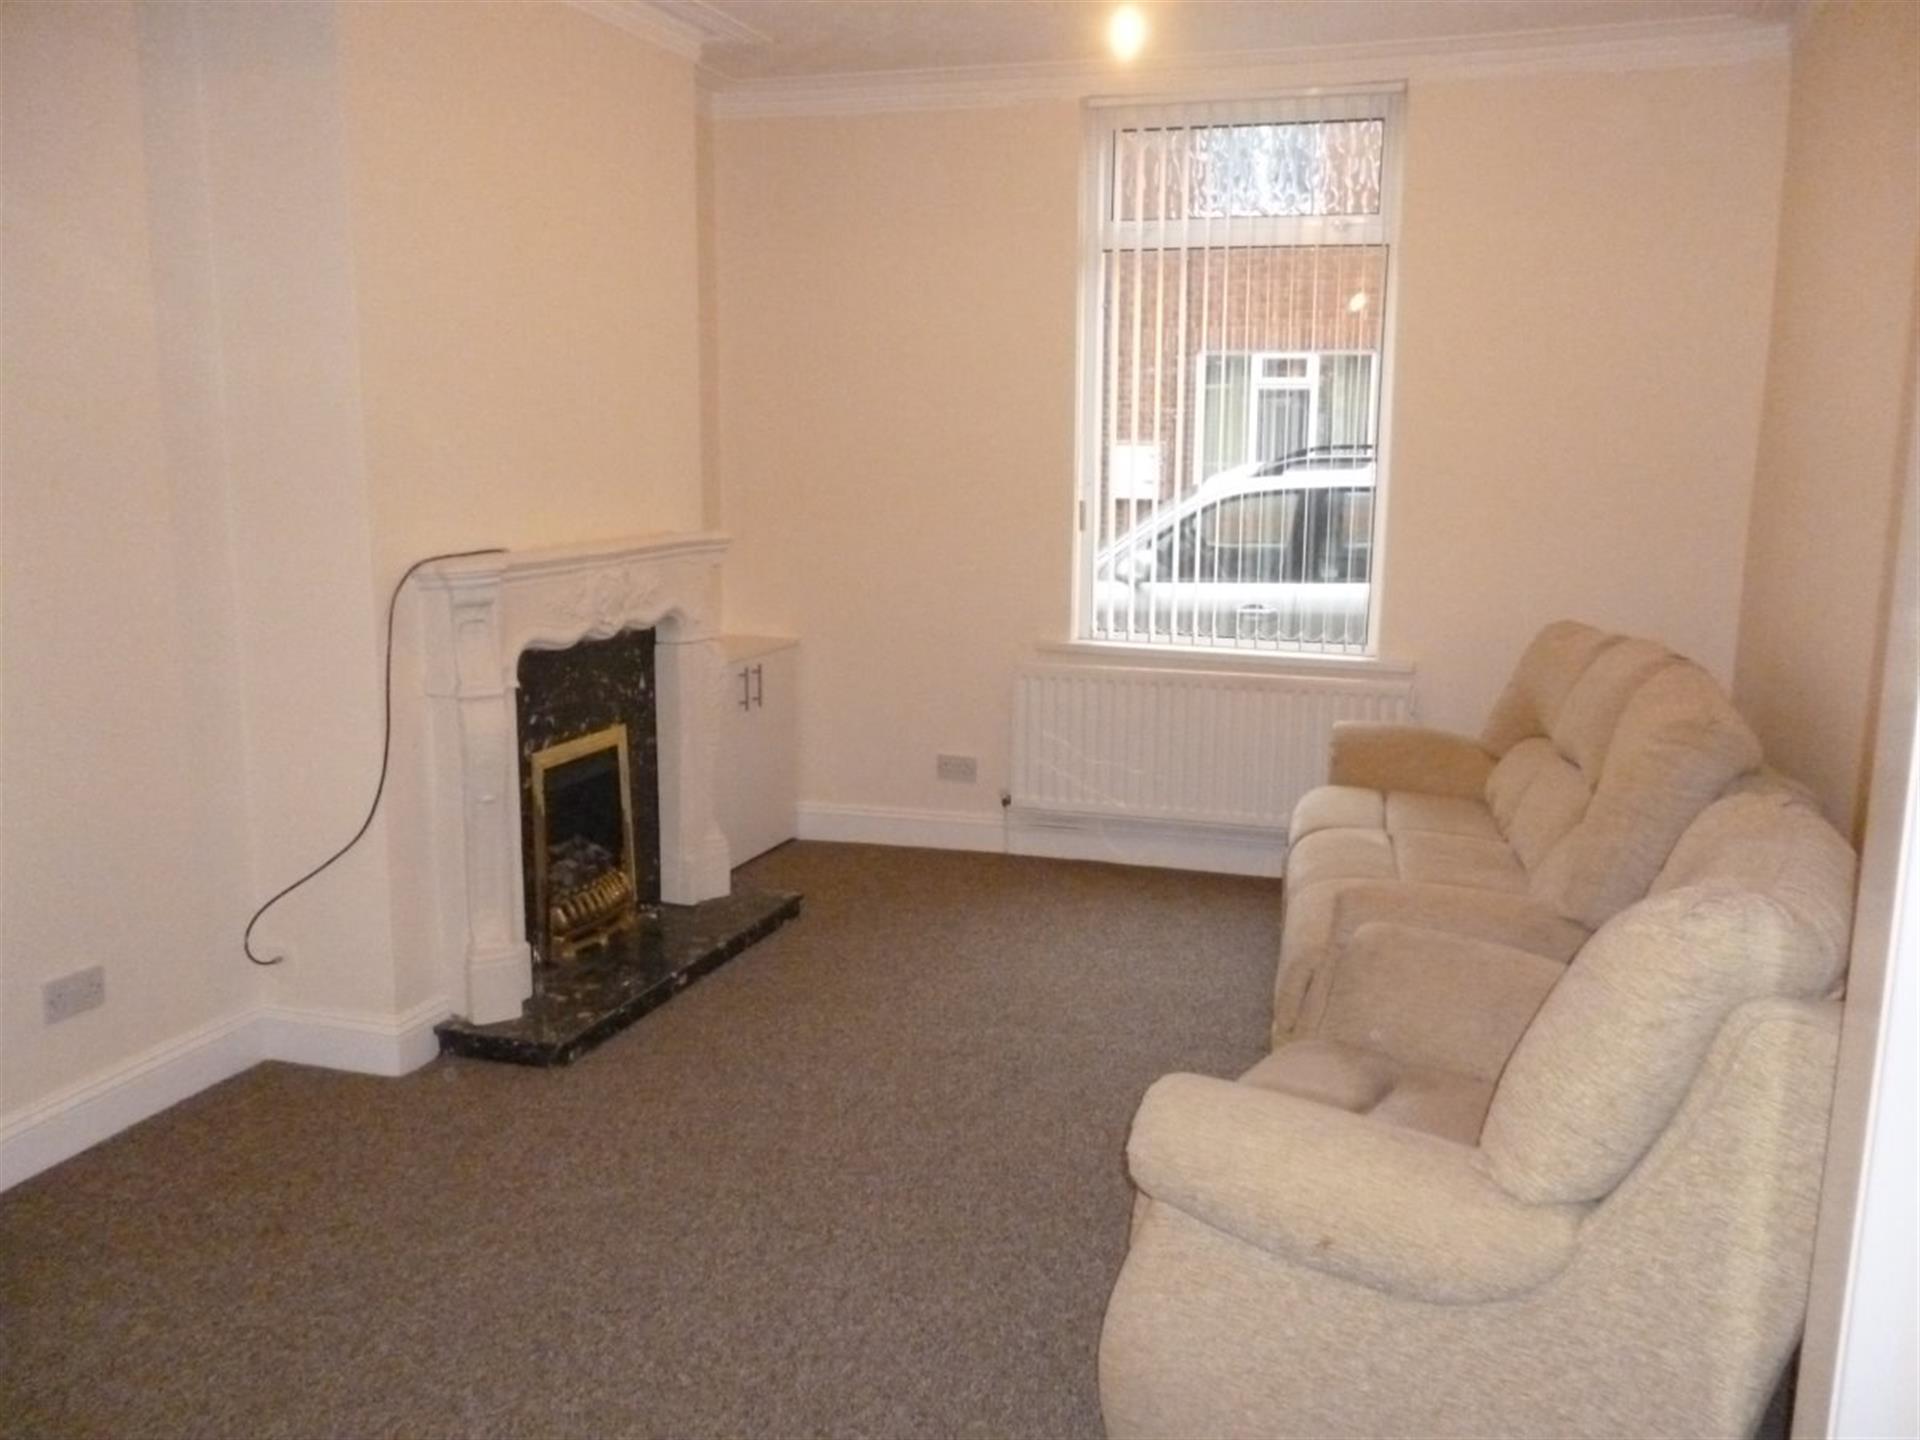 2 bedroom terraced house To Let in Bishop Auckland - photograph 3.